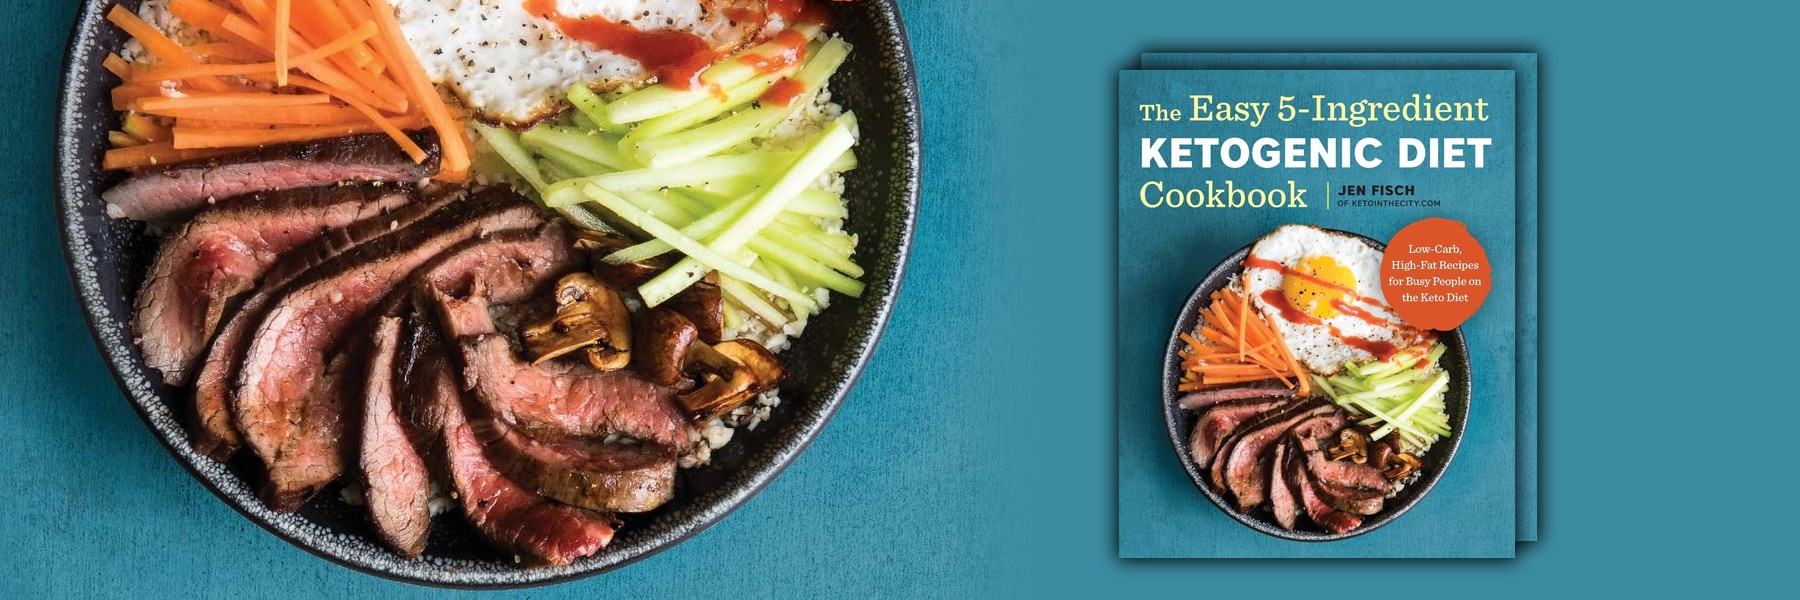 Keto Meal Prep : Essential Ketogenic Diet Meal Prep Guide For Beginners -  30 Day Ultra Low Carb Meal Plan to Prep, Grab, and Go (Paperback) 